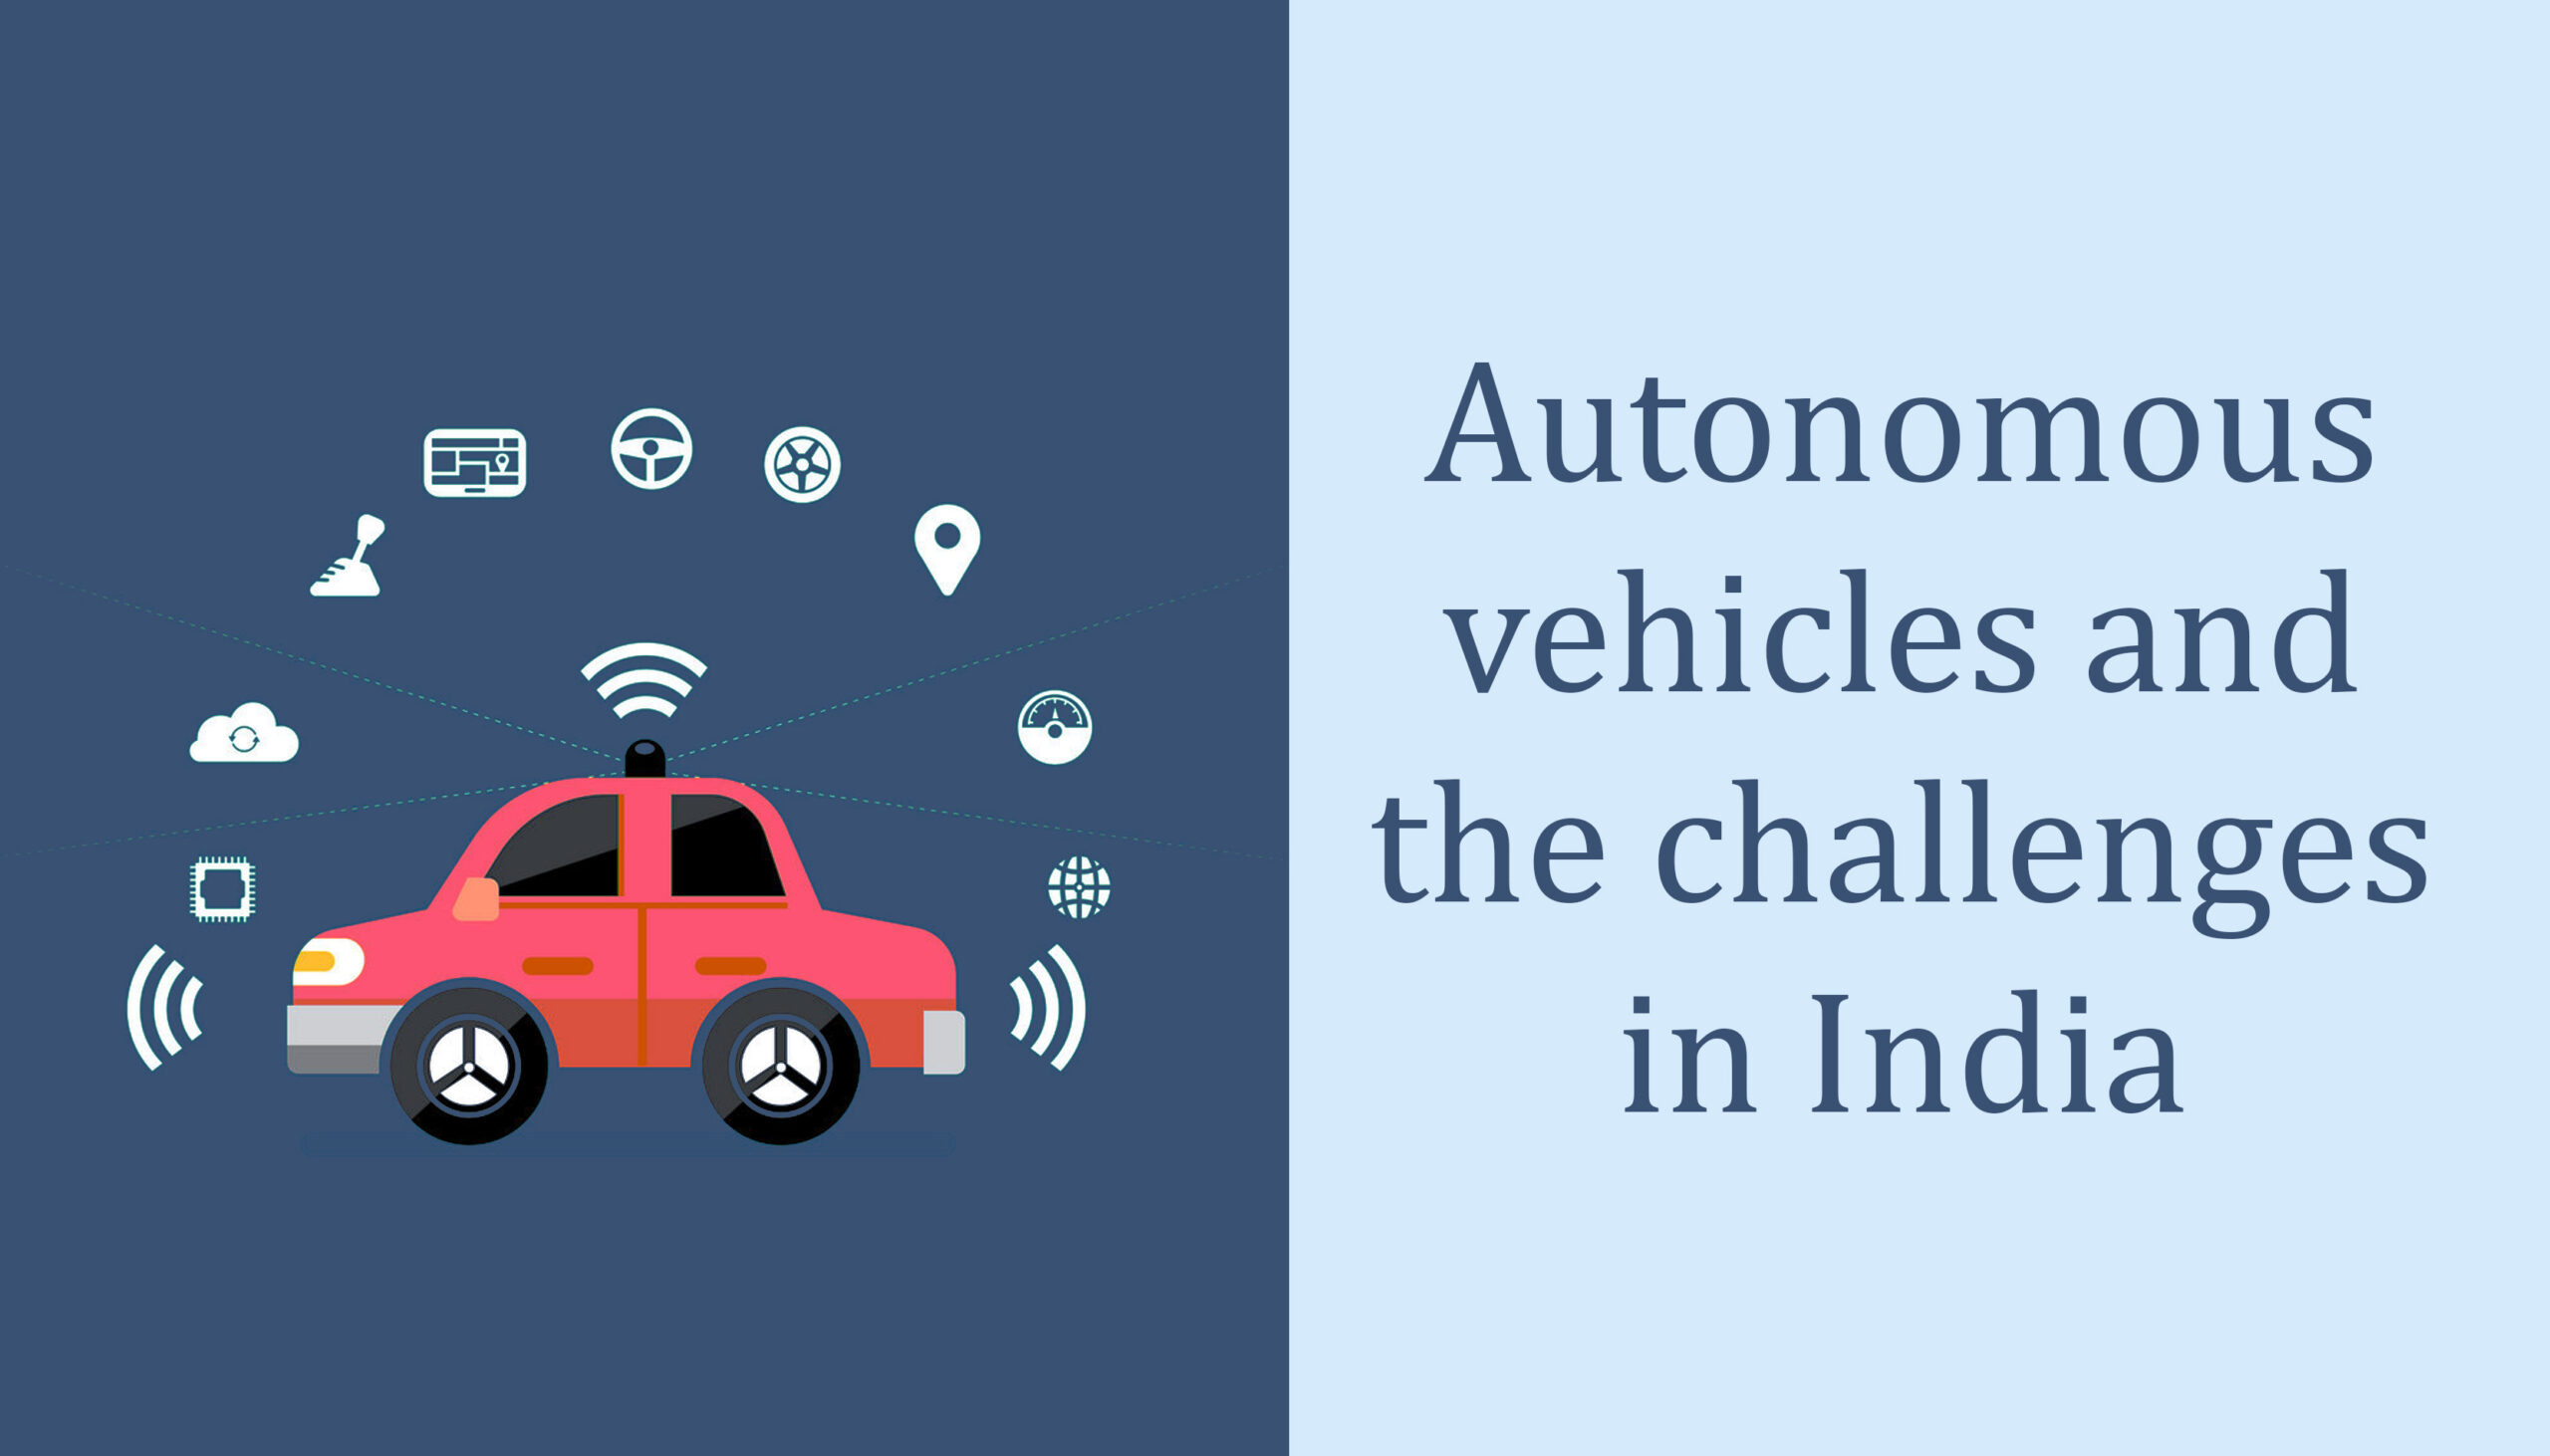 Autonomous vehicles and the challenges in India